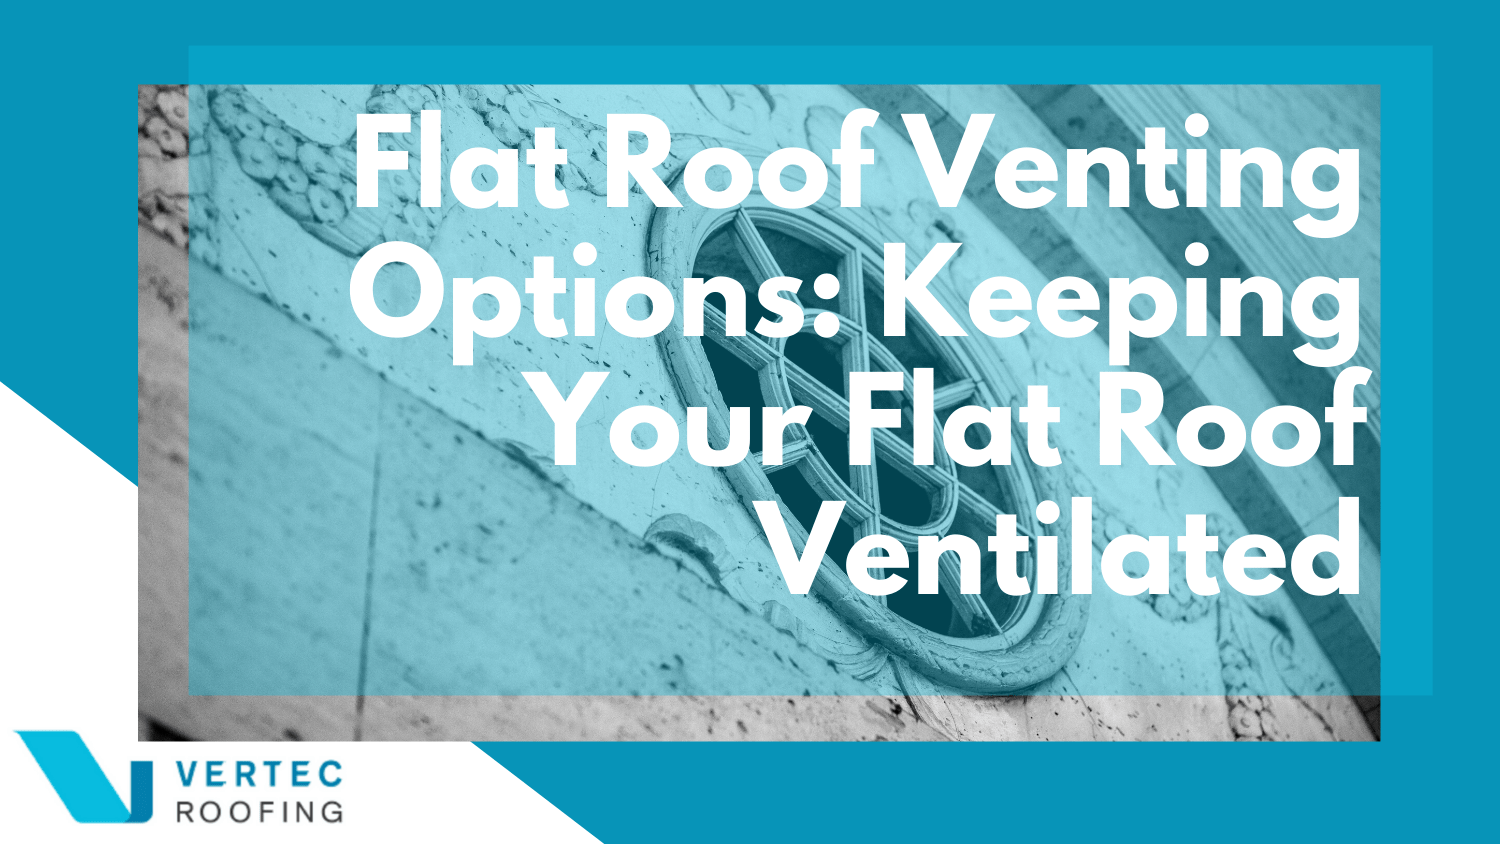 Your Flat Roof Venting Options